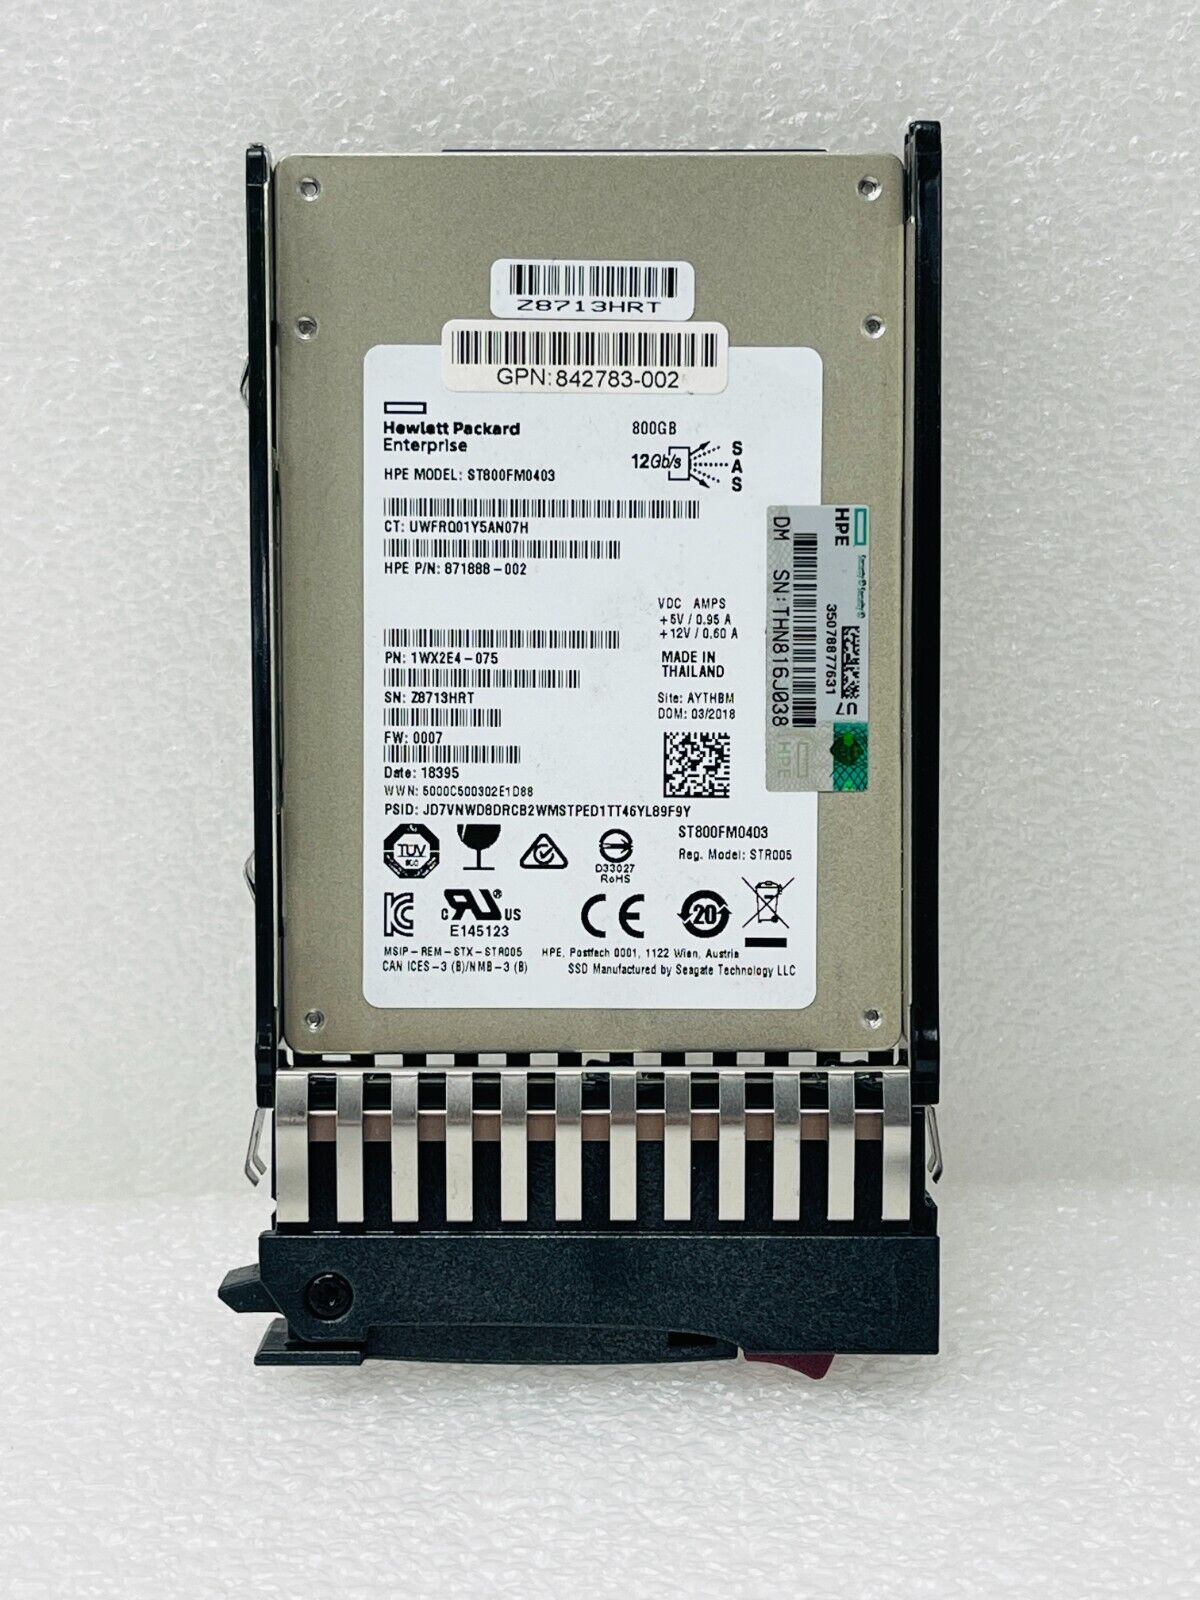 HPE 800GB SAS 12Gbps 2.5-inch SSD ST800FM0403, 871888-002 / USED - 